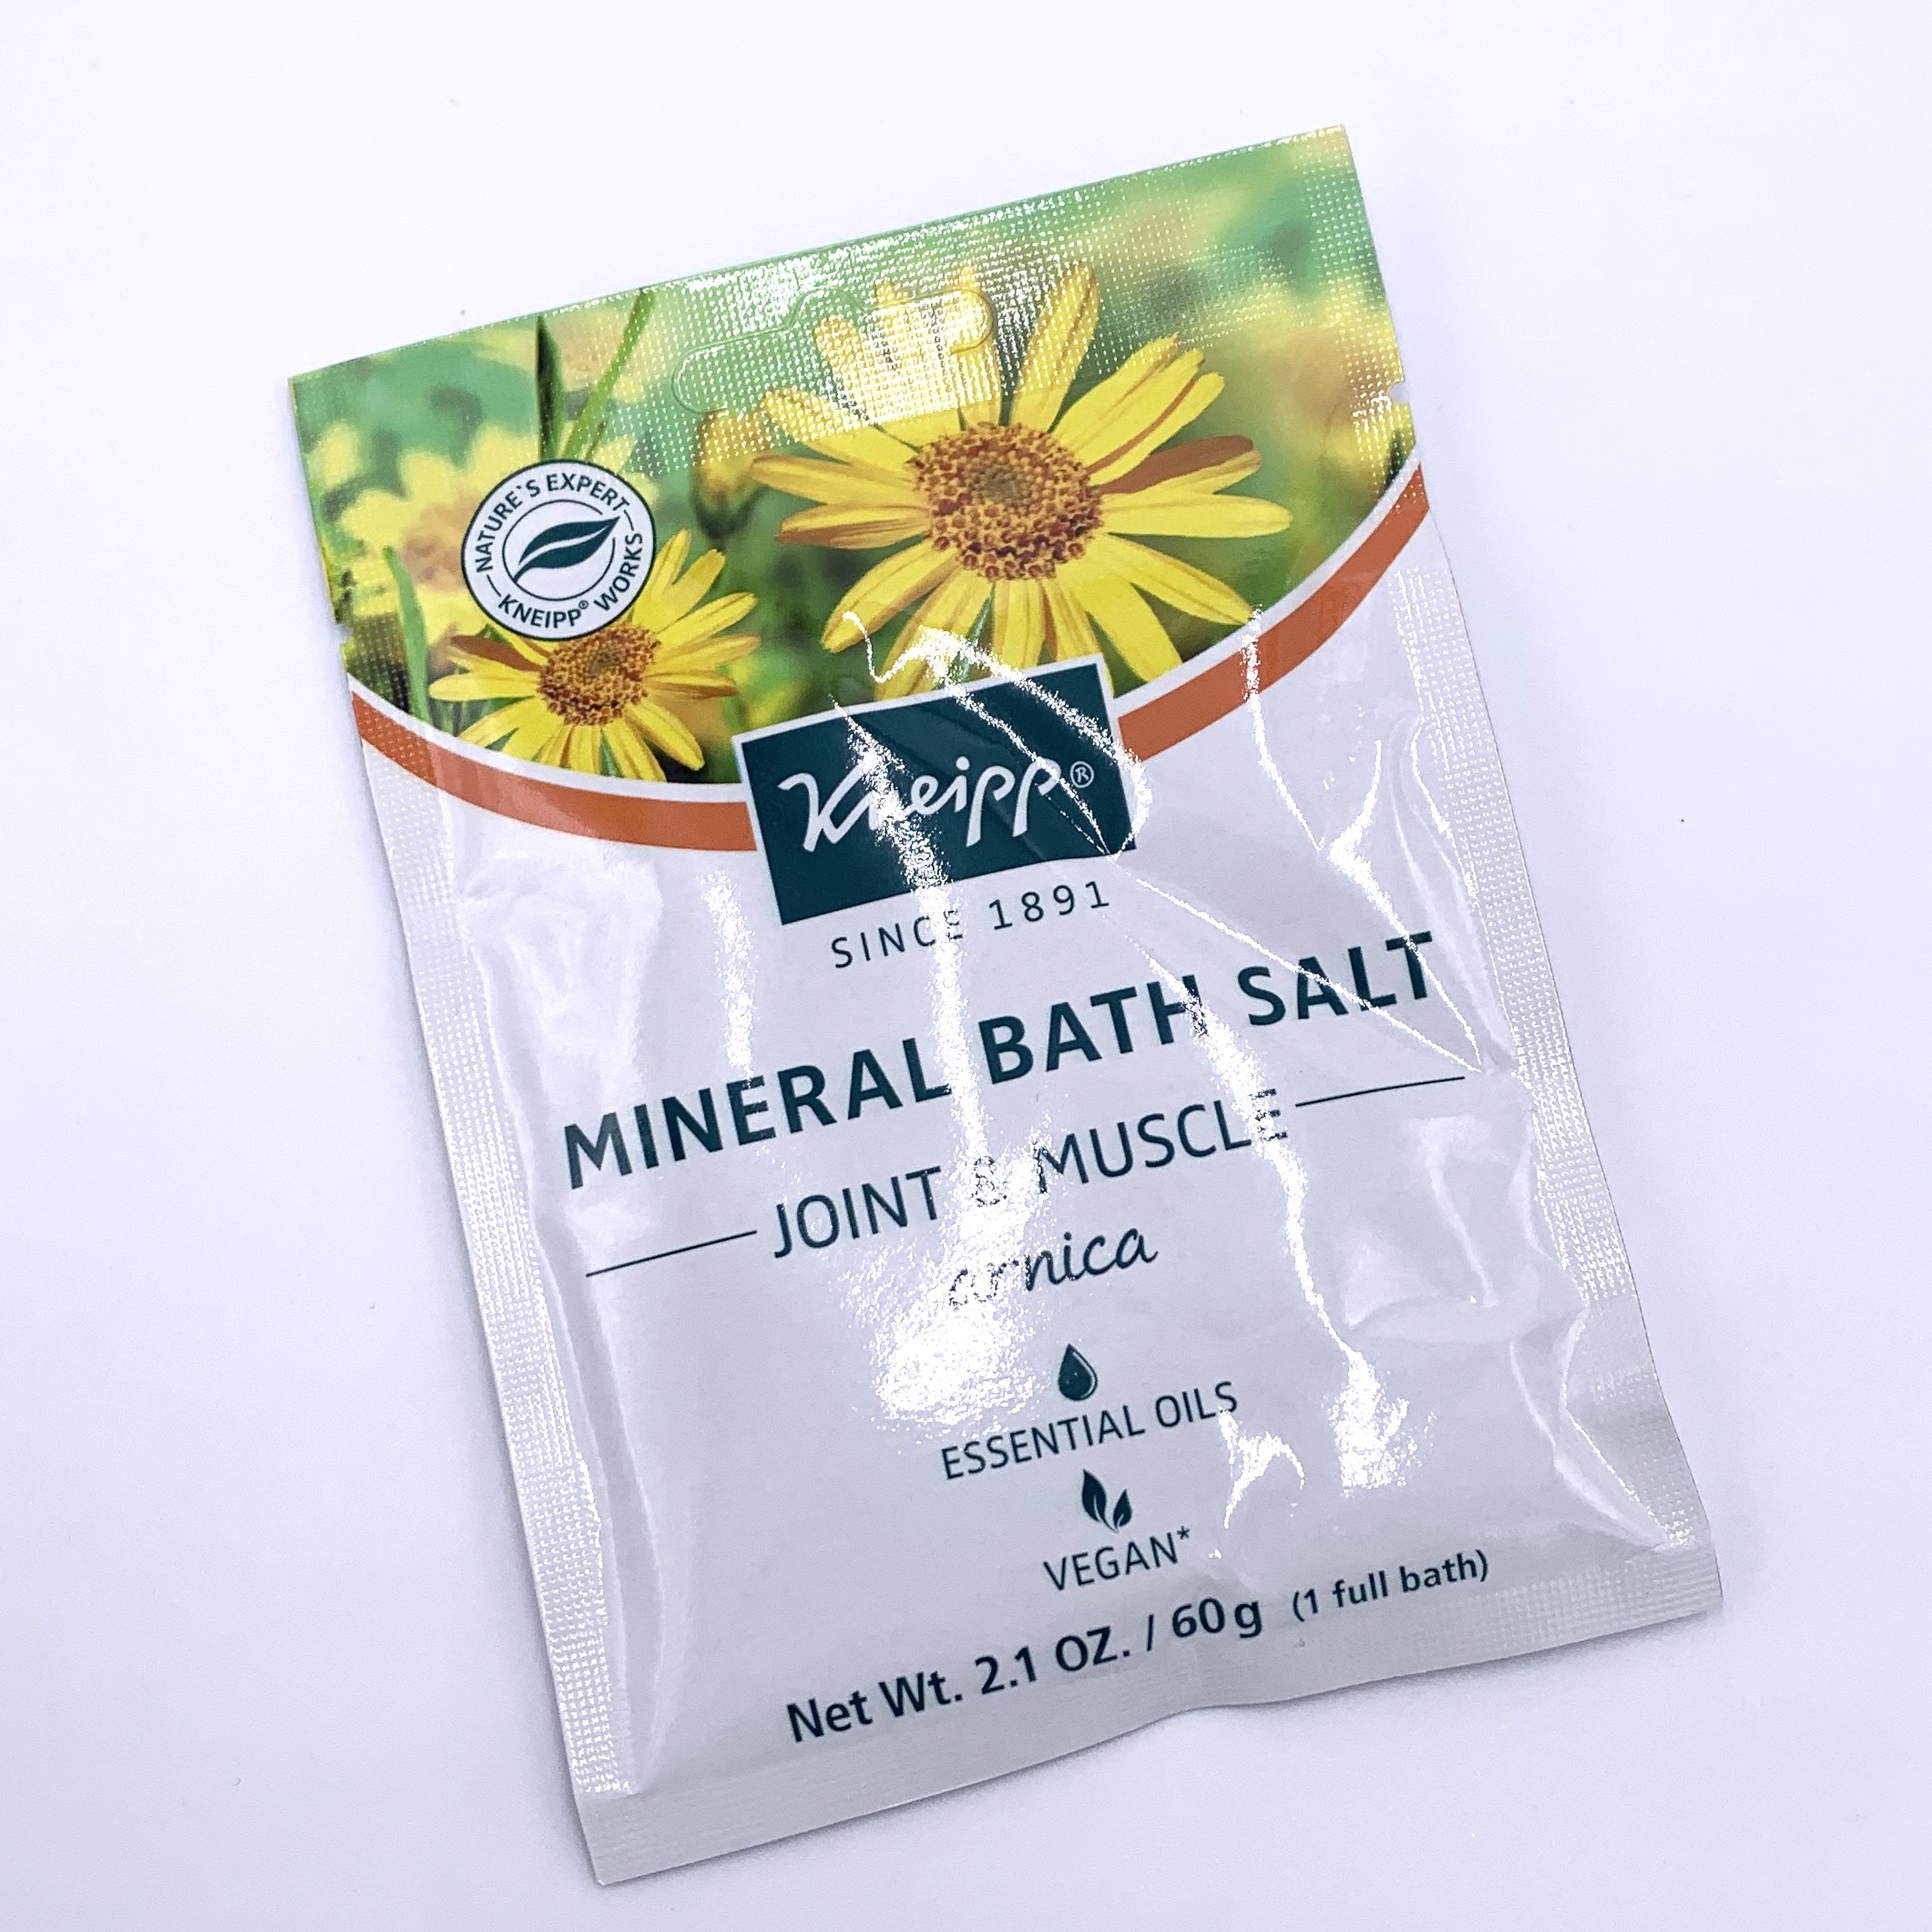 Kneipp Mineral Bath Salt Joint & Muscle Front for Cocotique August 2020